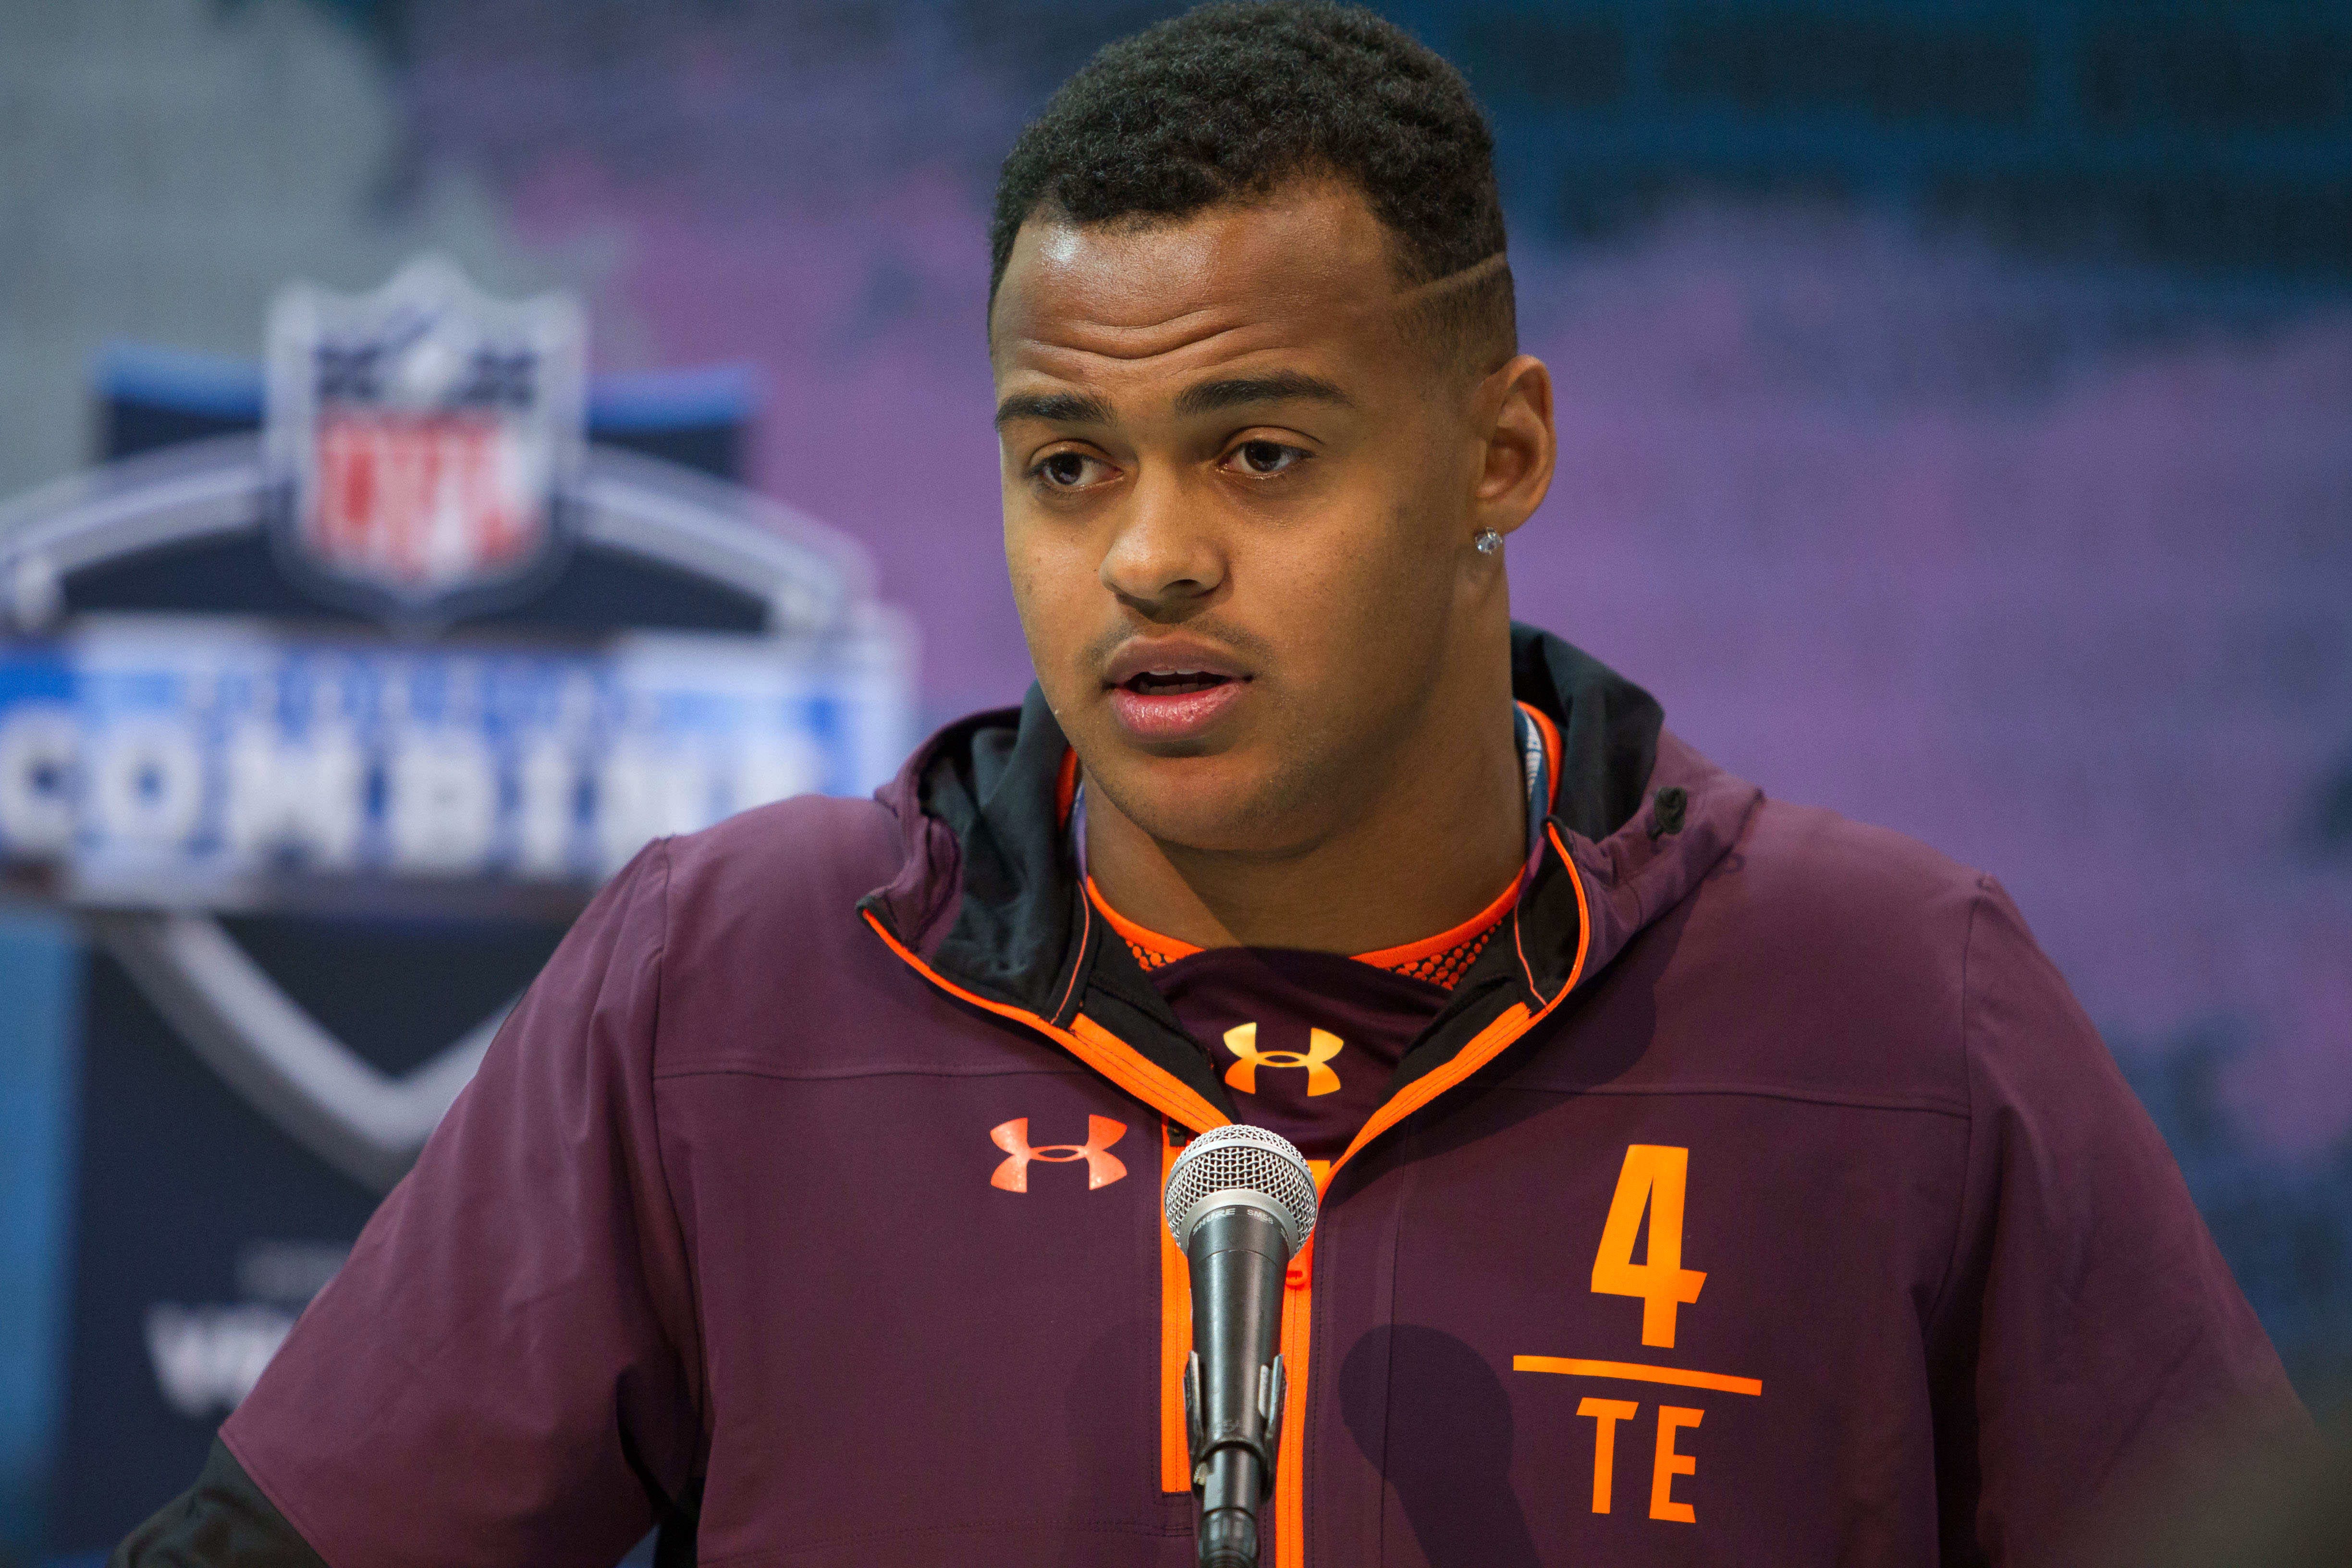 Iowa tight end Noah Fant speaks to media during the 2019 NFL Combine at the Indiana Convention Center.